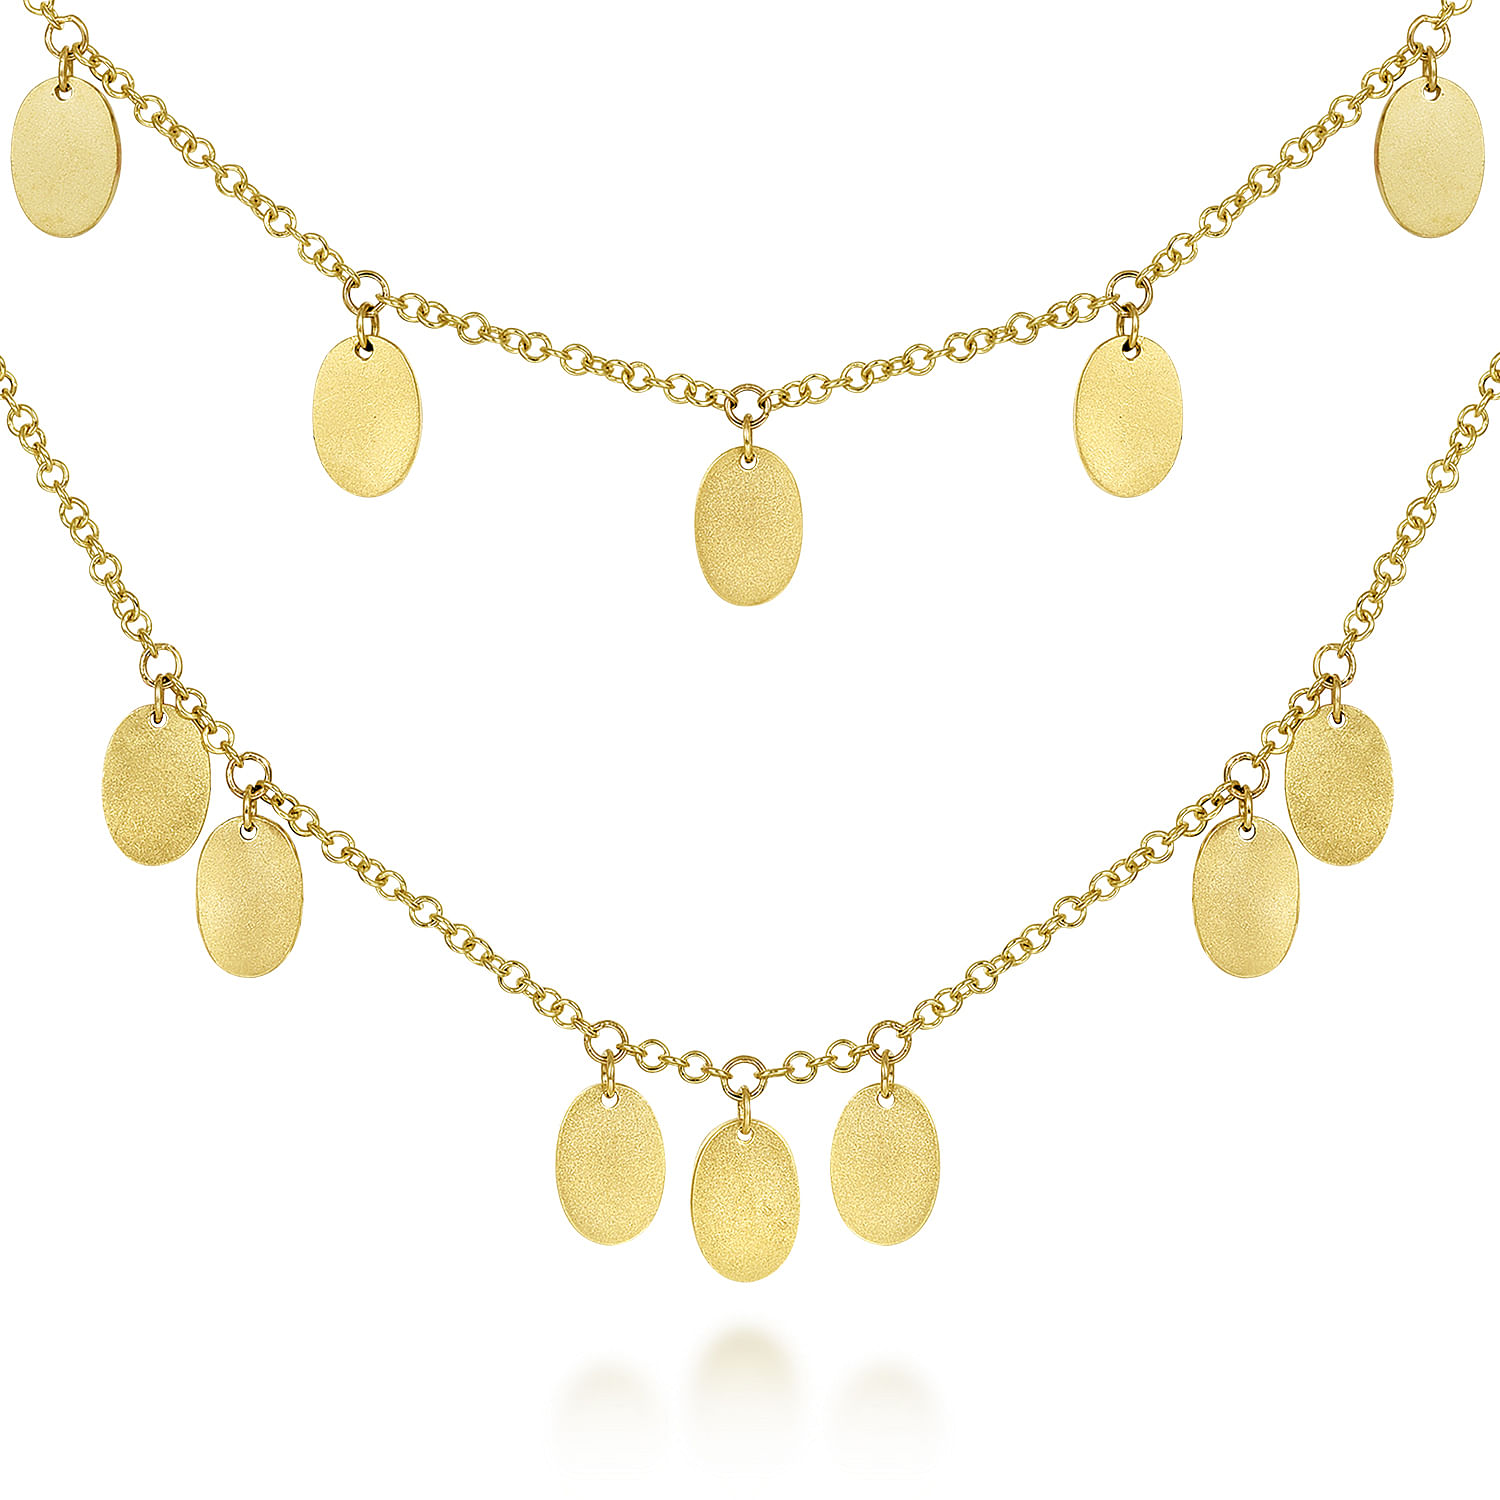 Gabriel - 14K Yellow Gold Two Strand Necklace with Oval Shape Drops